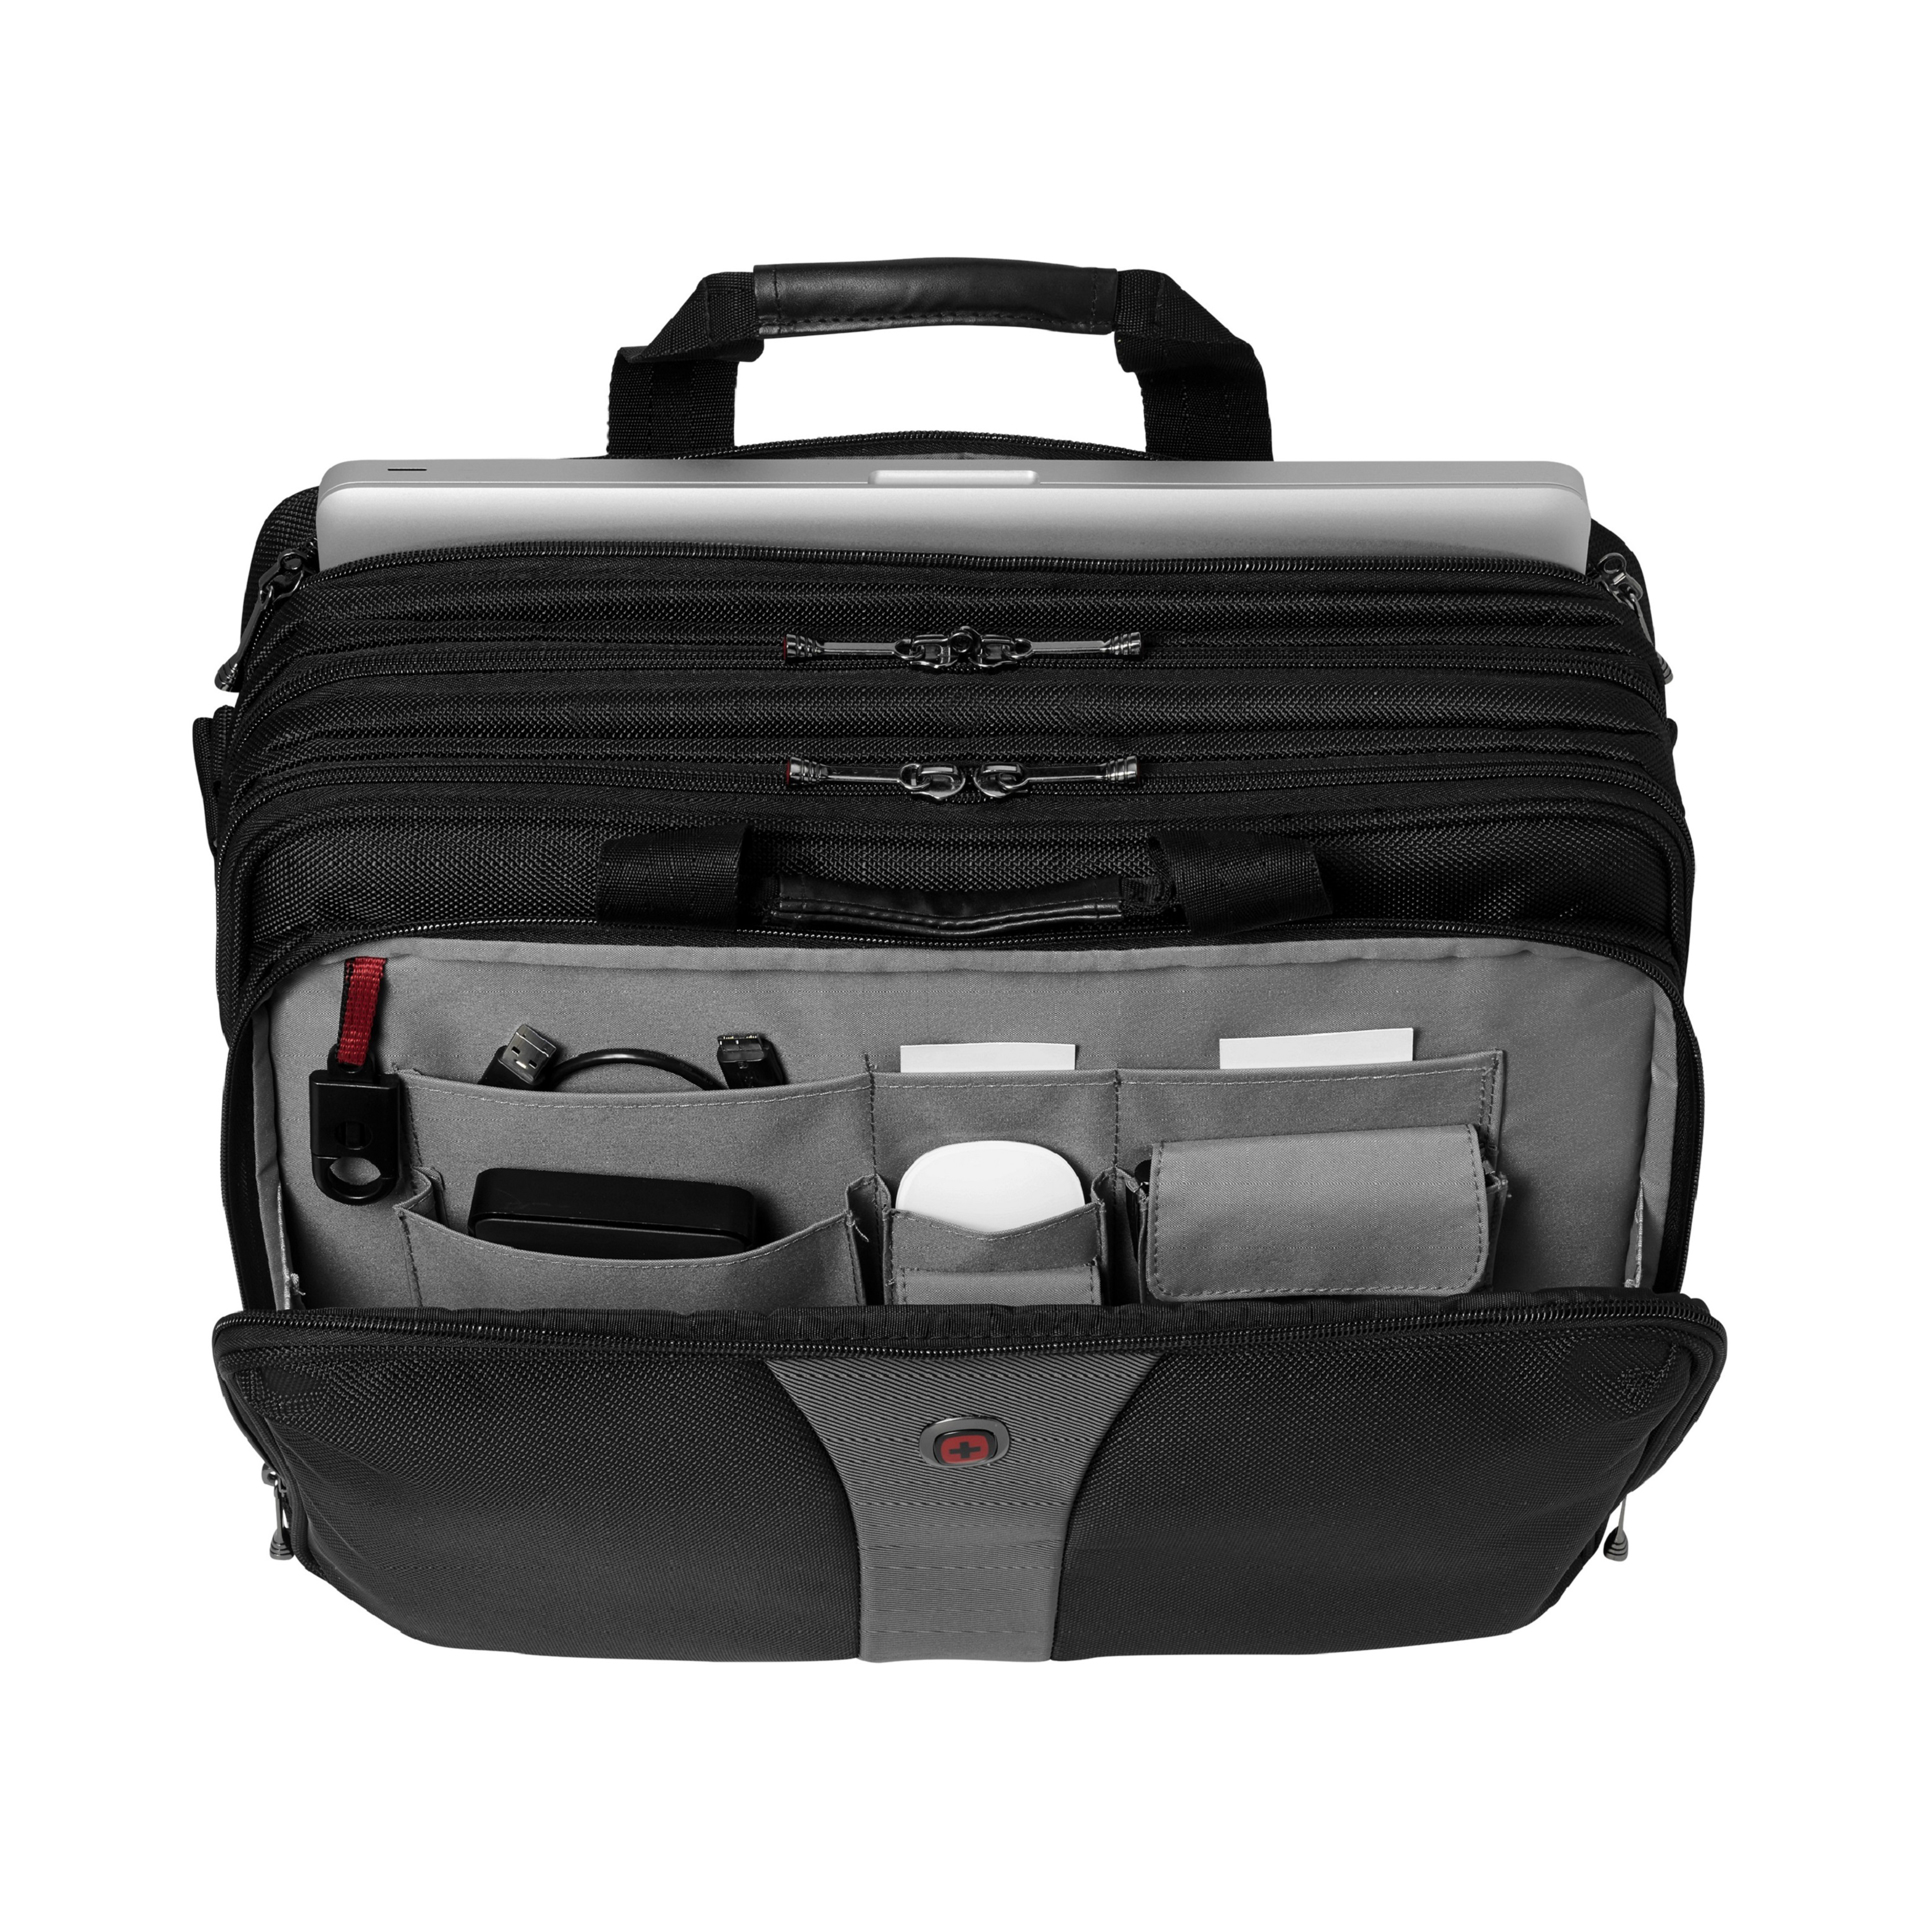 Wenger Legacy Laptop Case showing inner compartments